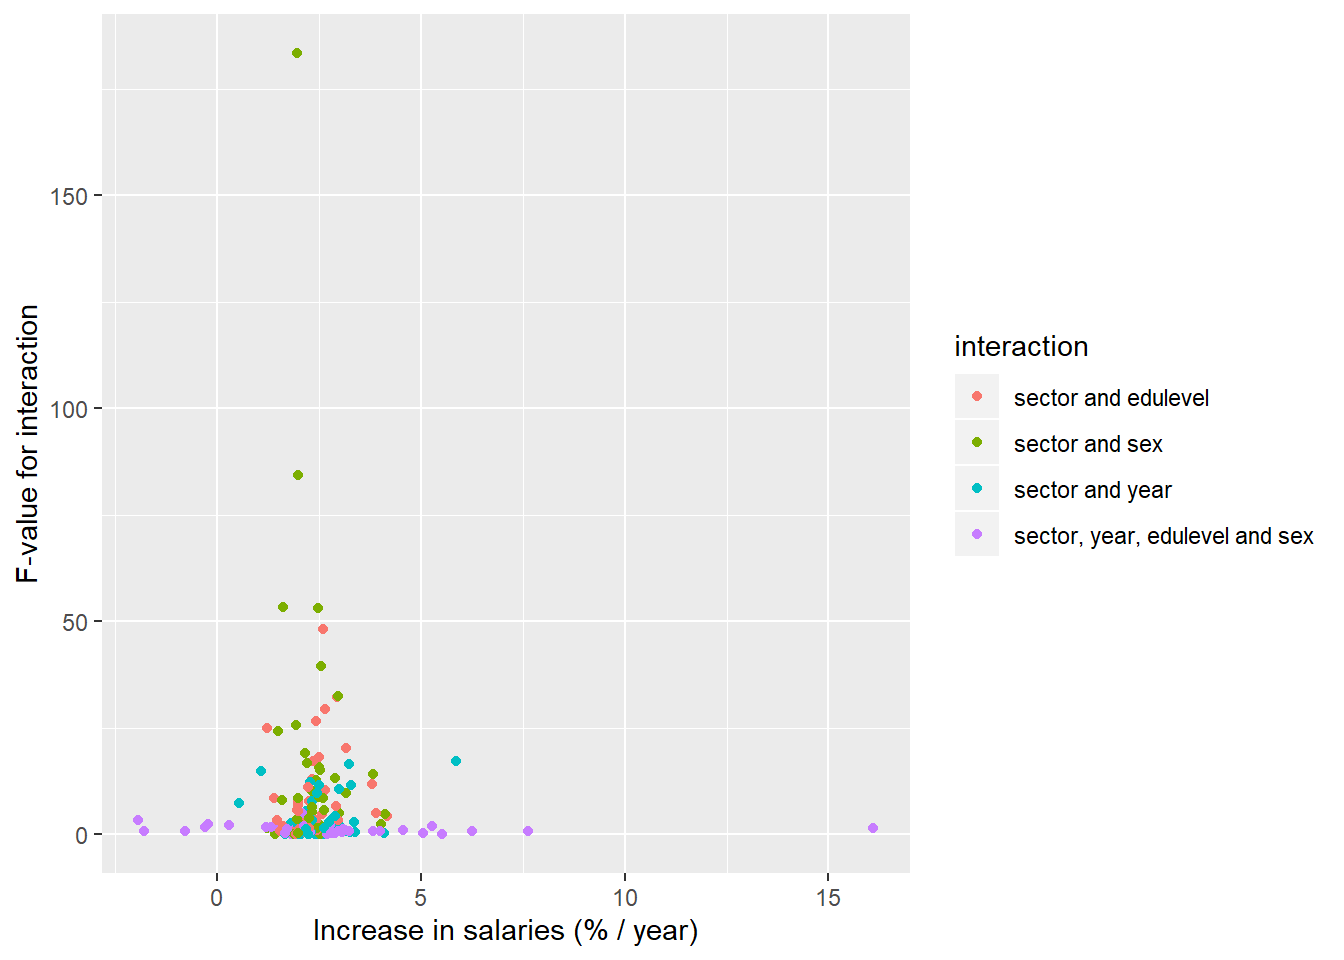 The significance of the interaction between sector, edulevel, year and sex on the salary in Sweden, a comparison between different occupational groups, Year 2014 - 2018